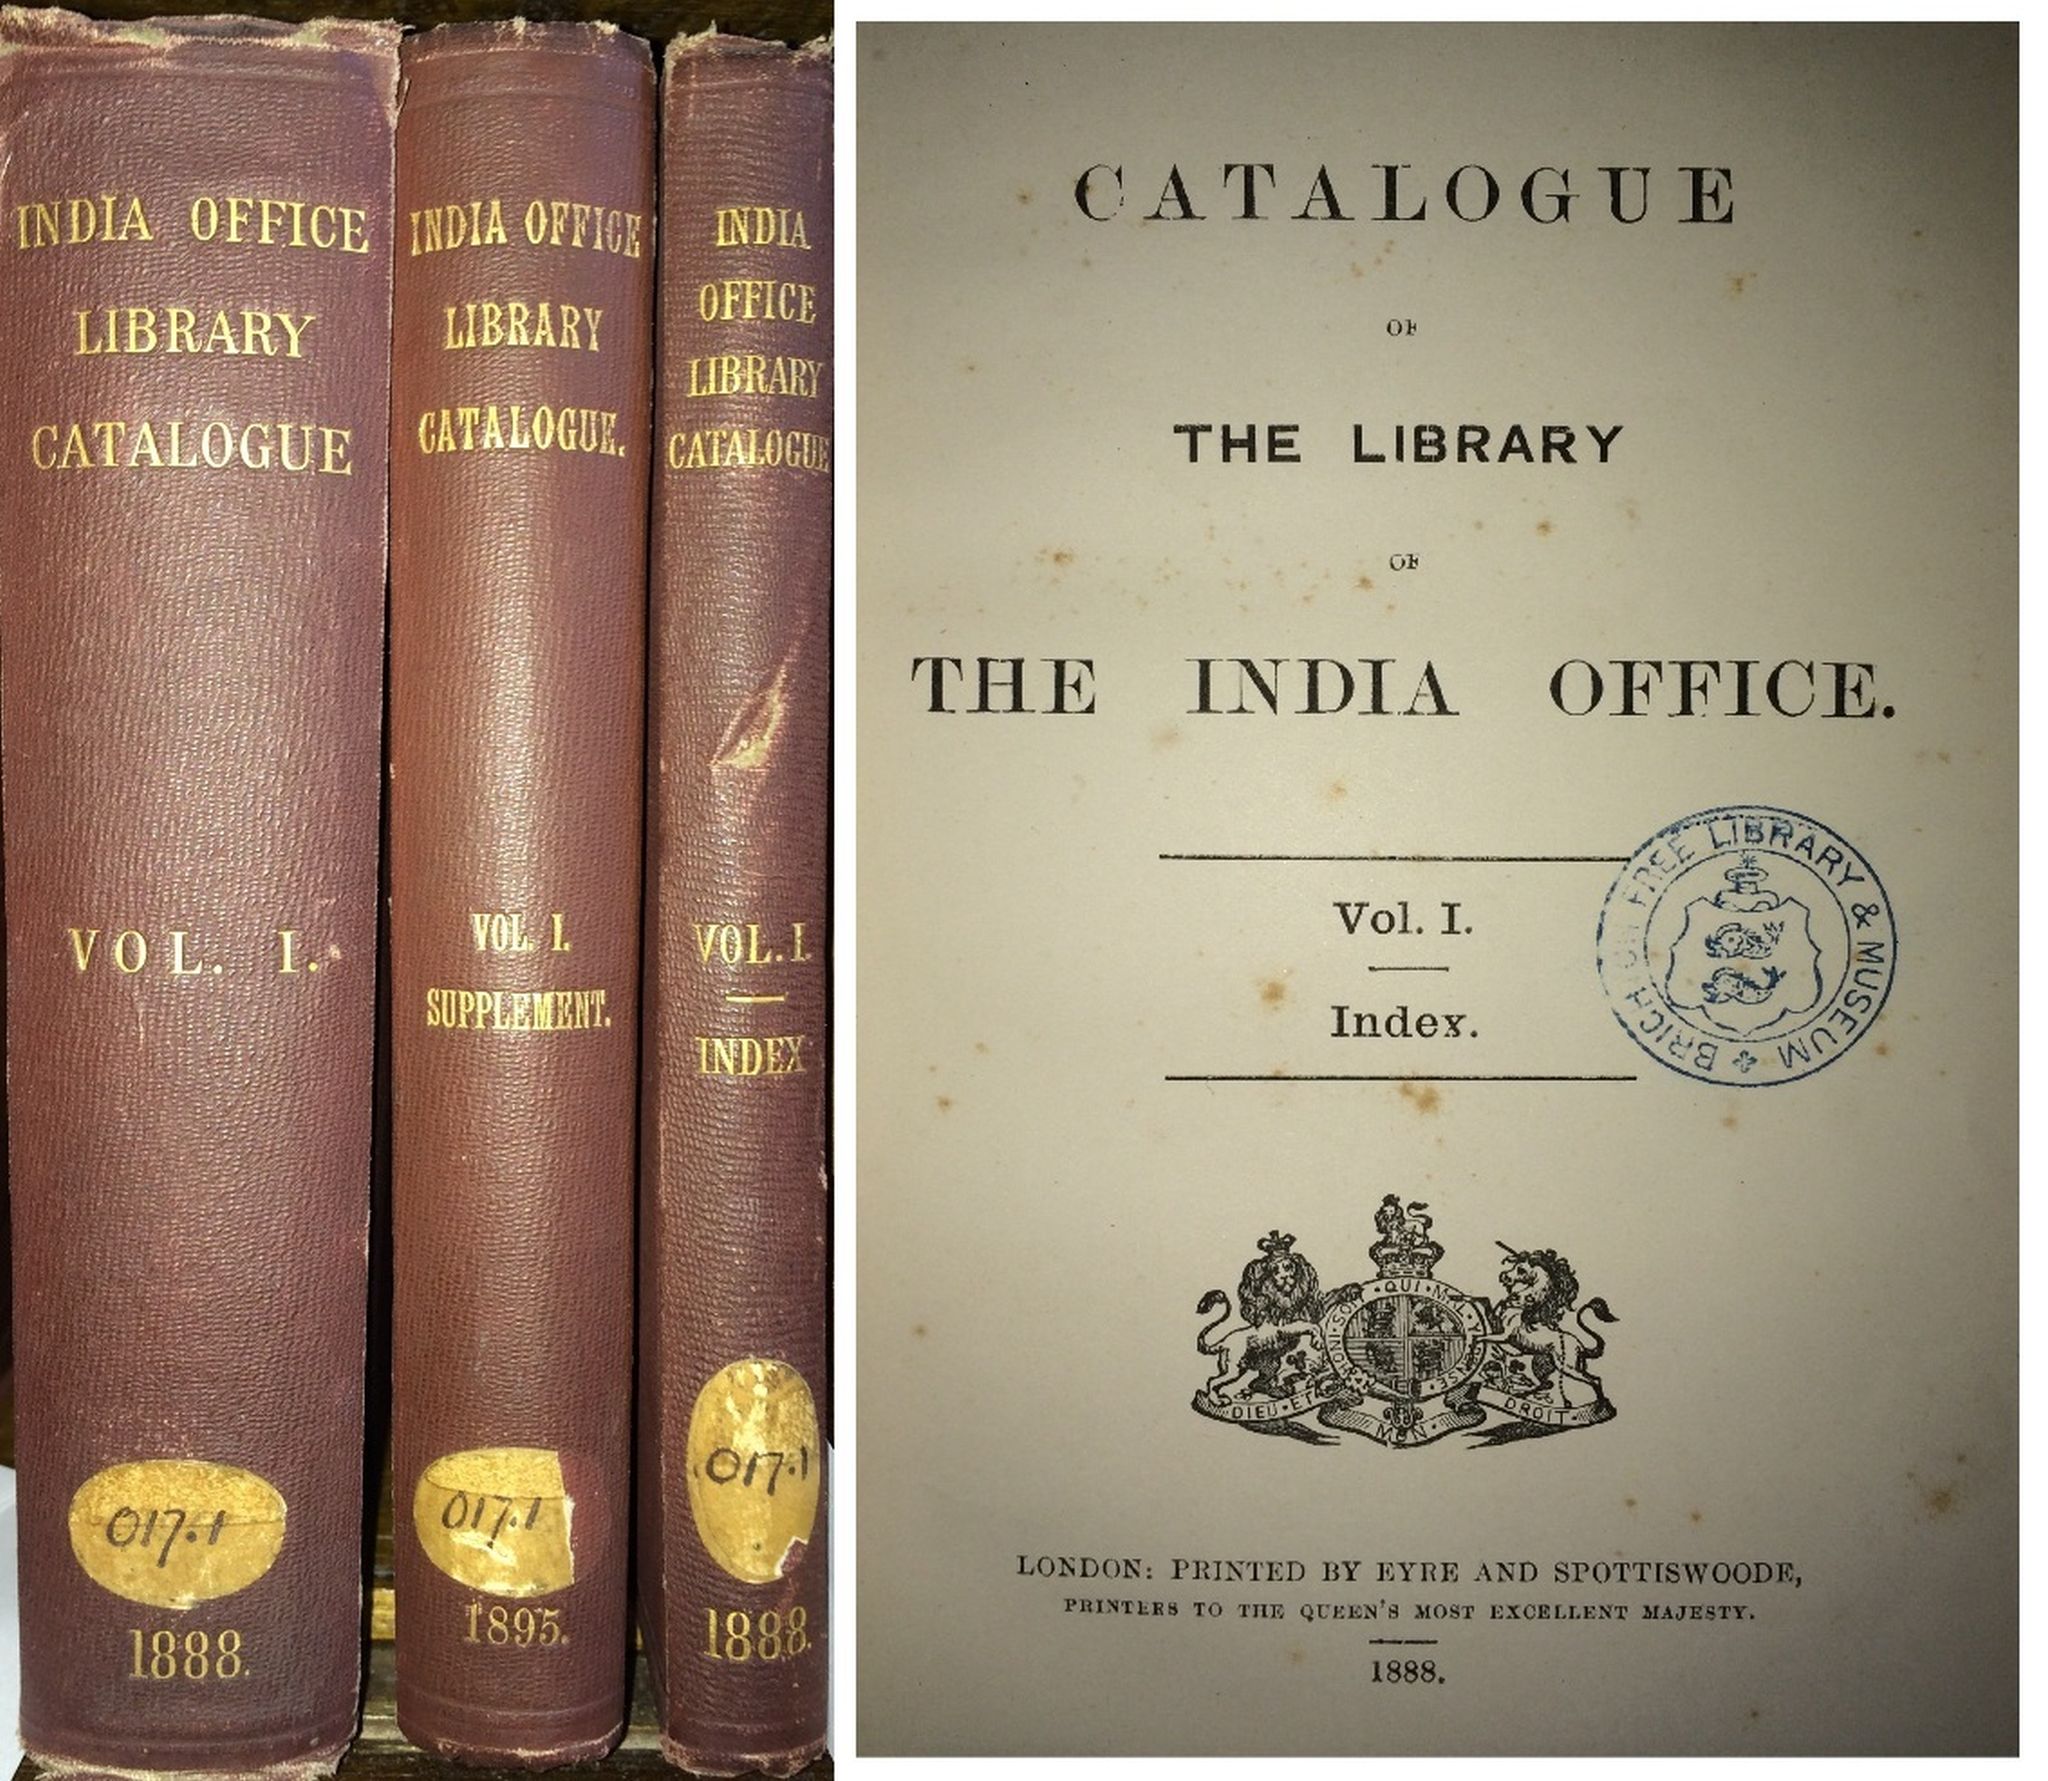 INDIA OFFICE LIBRARY CATALOGUES - Catalogue of the Library of the India Office, 1888, First Edition,